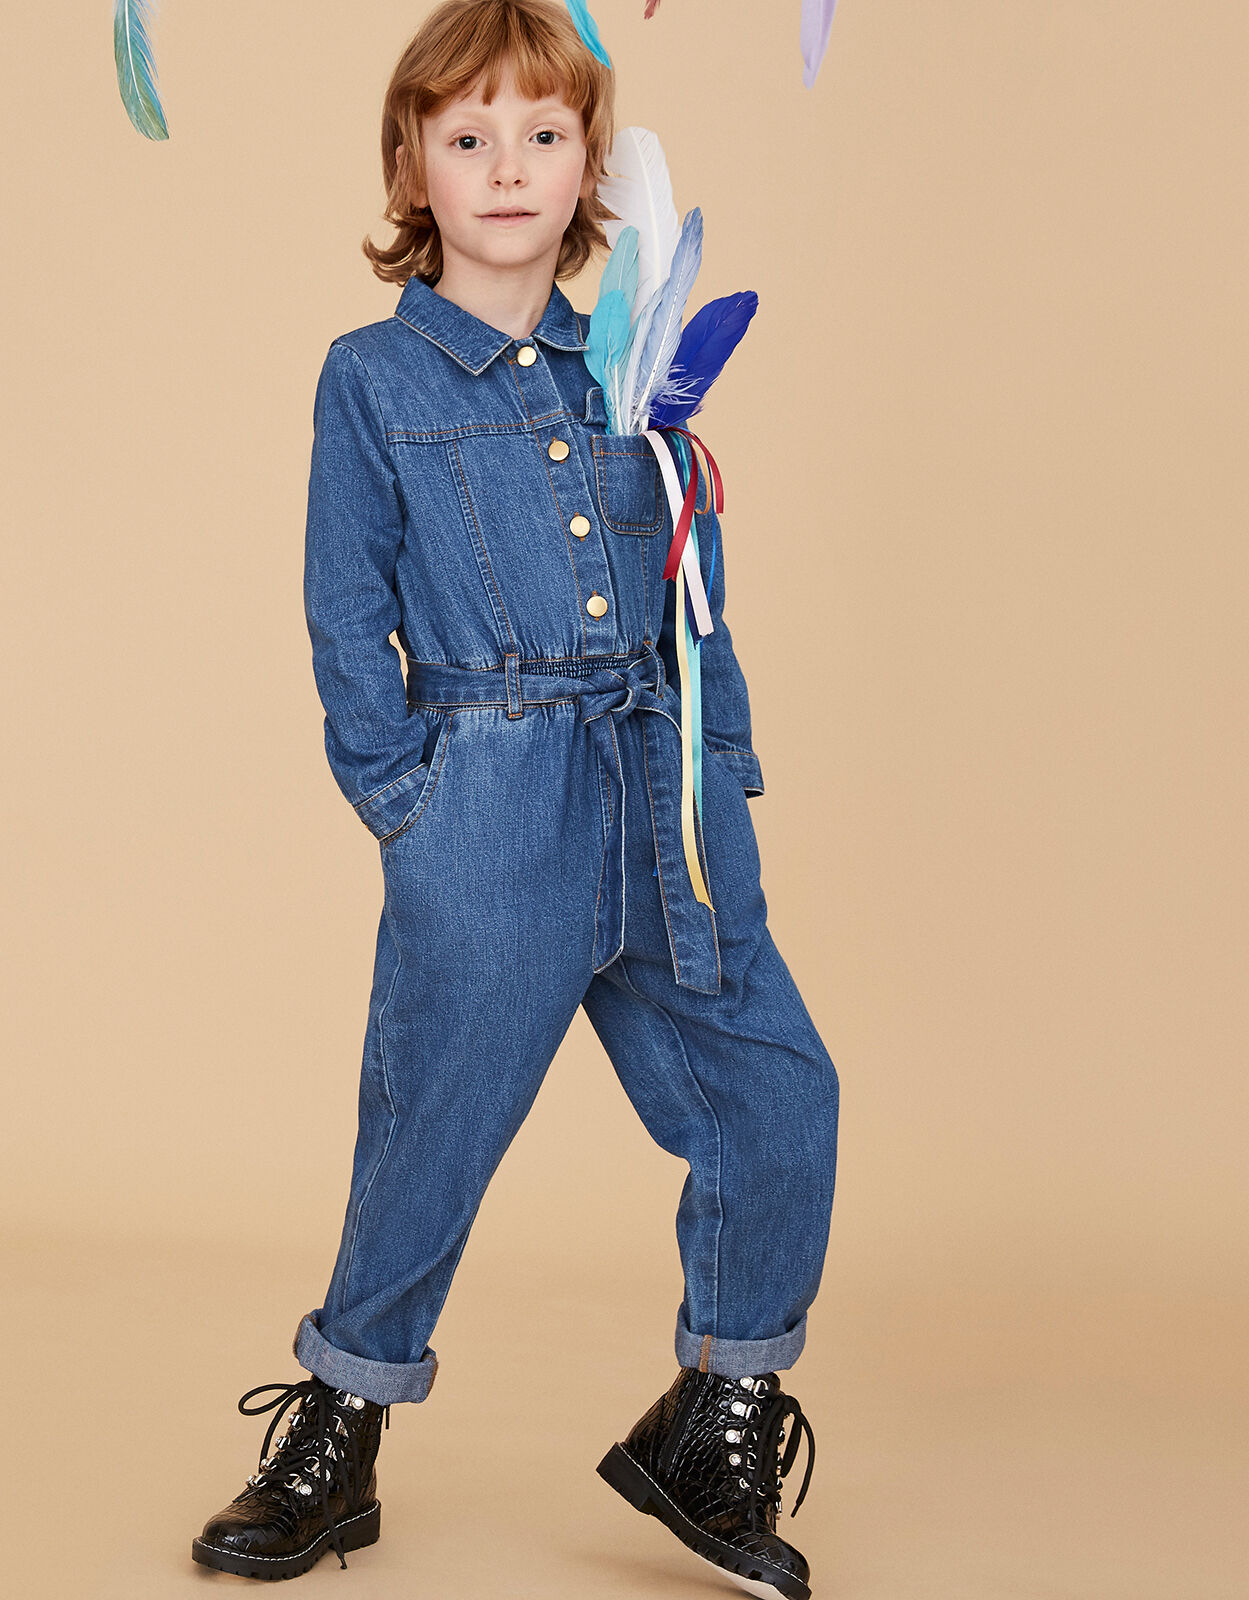 Girls' Jumpsuits | One-and Done Girls' Jumpsuits & Playsuits | Bardot Junior